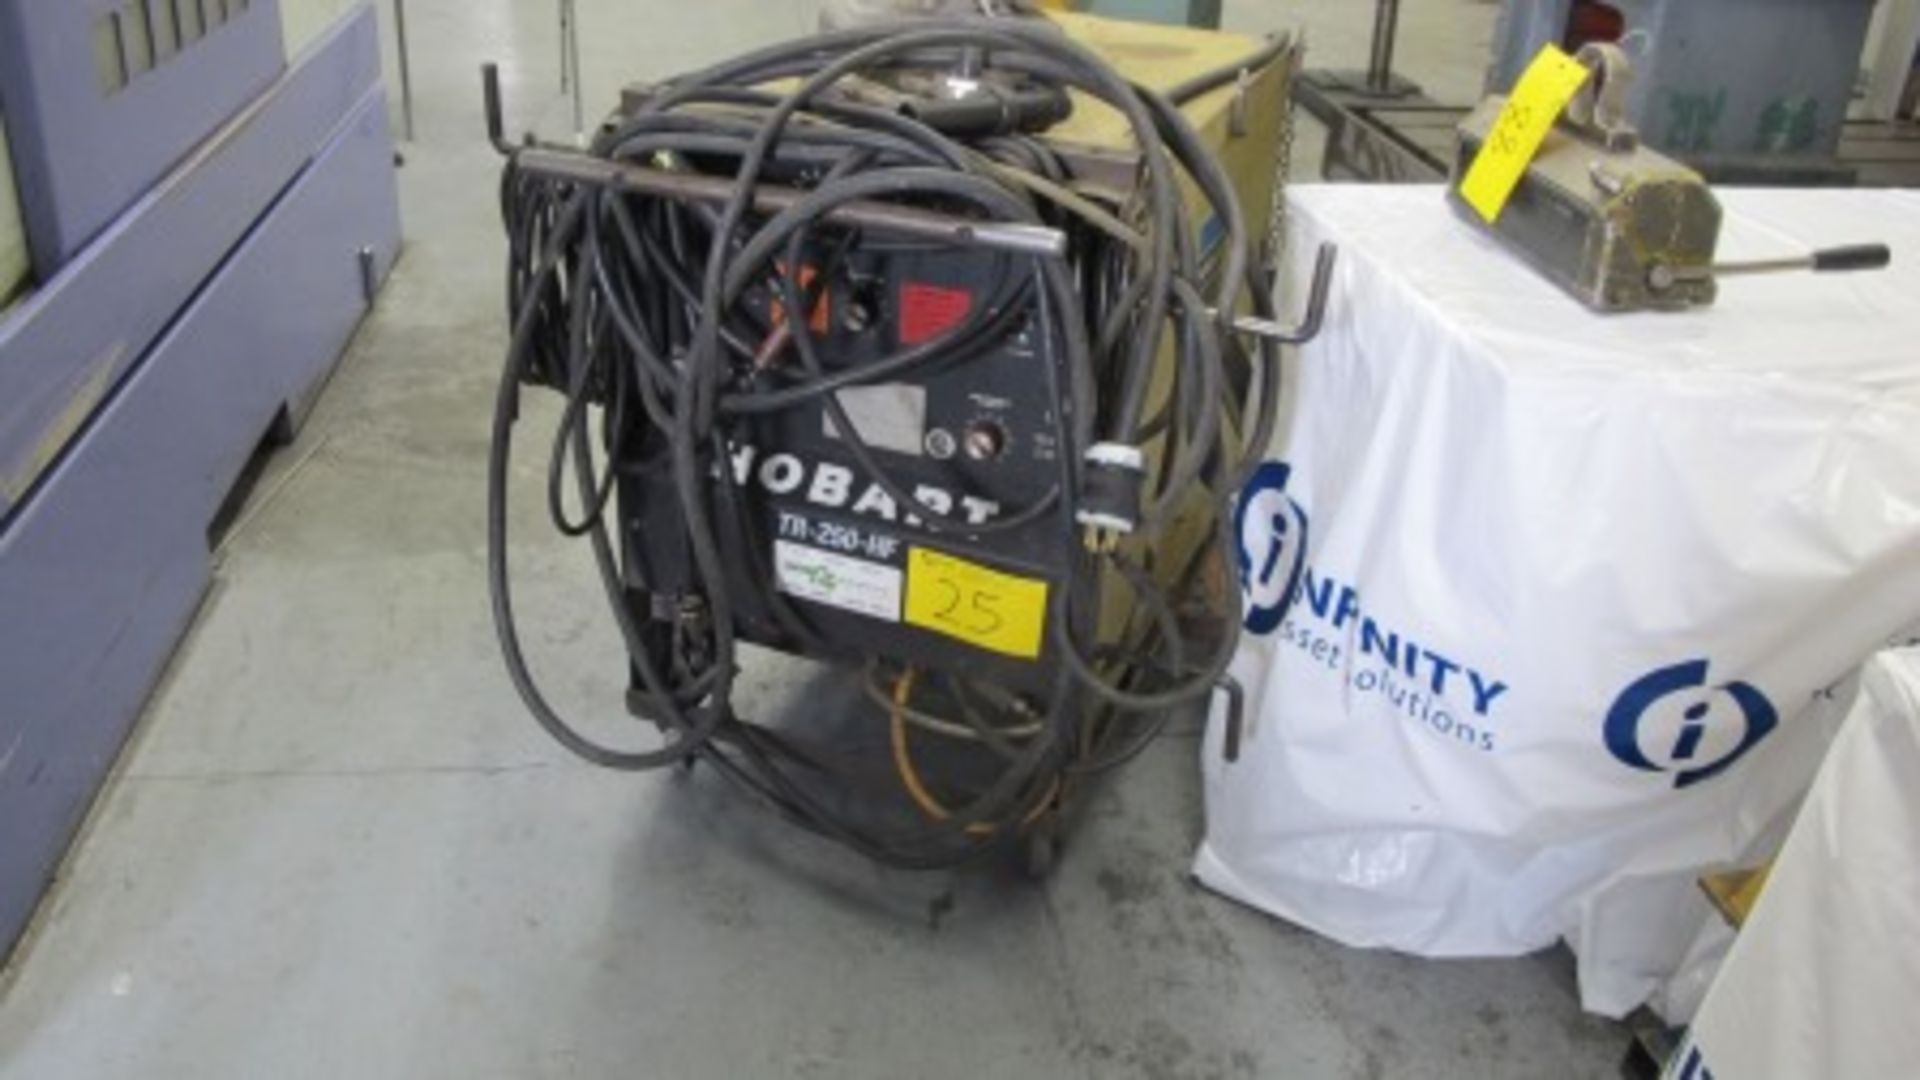 HOBART TR-250-HF ARC WELDER W/CABLES, GUN AND FOOT CONTROL, S/N 6026